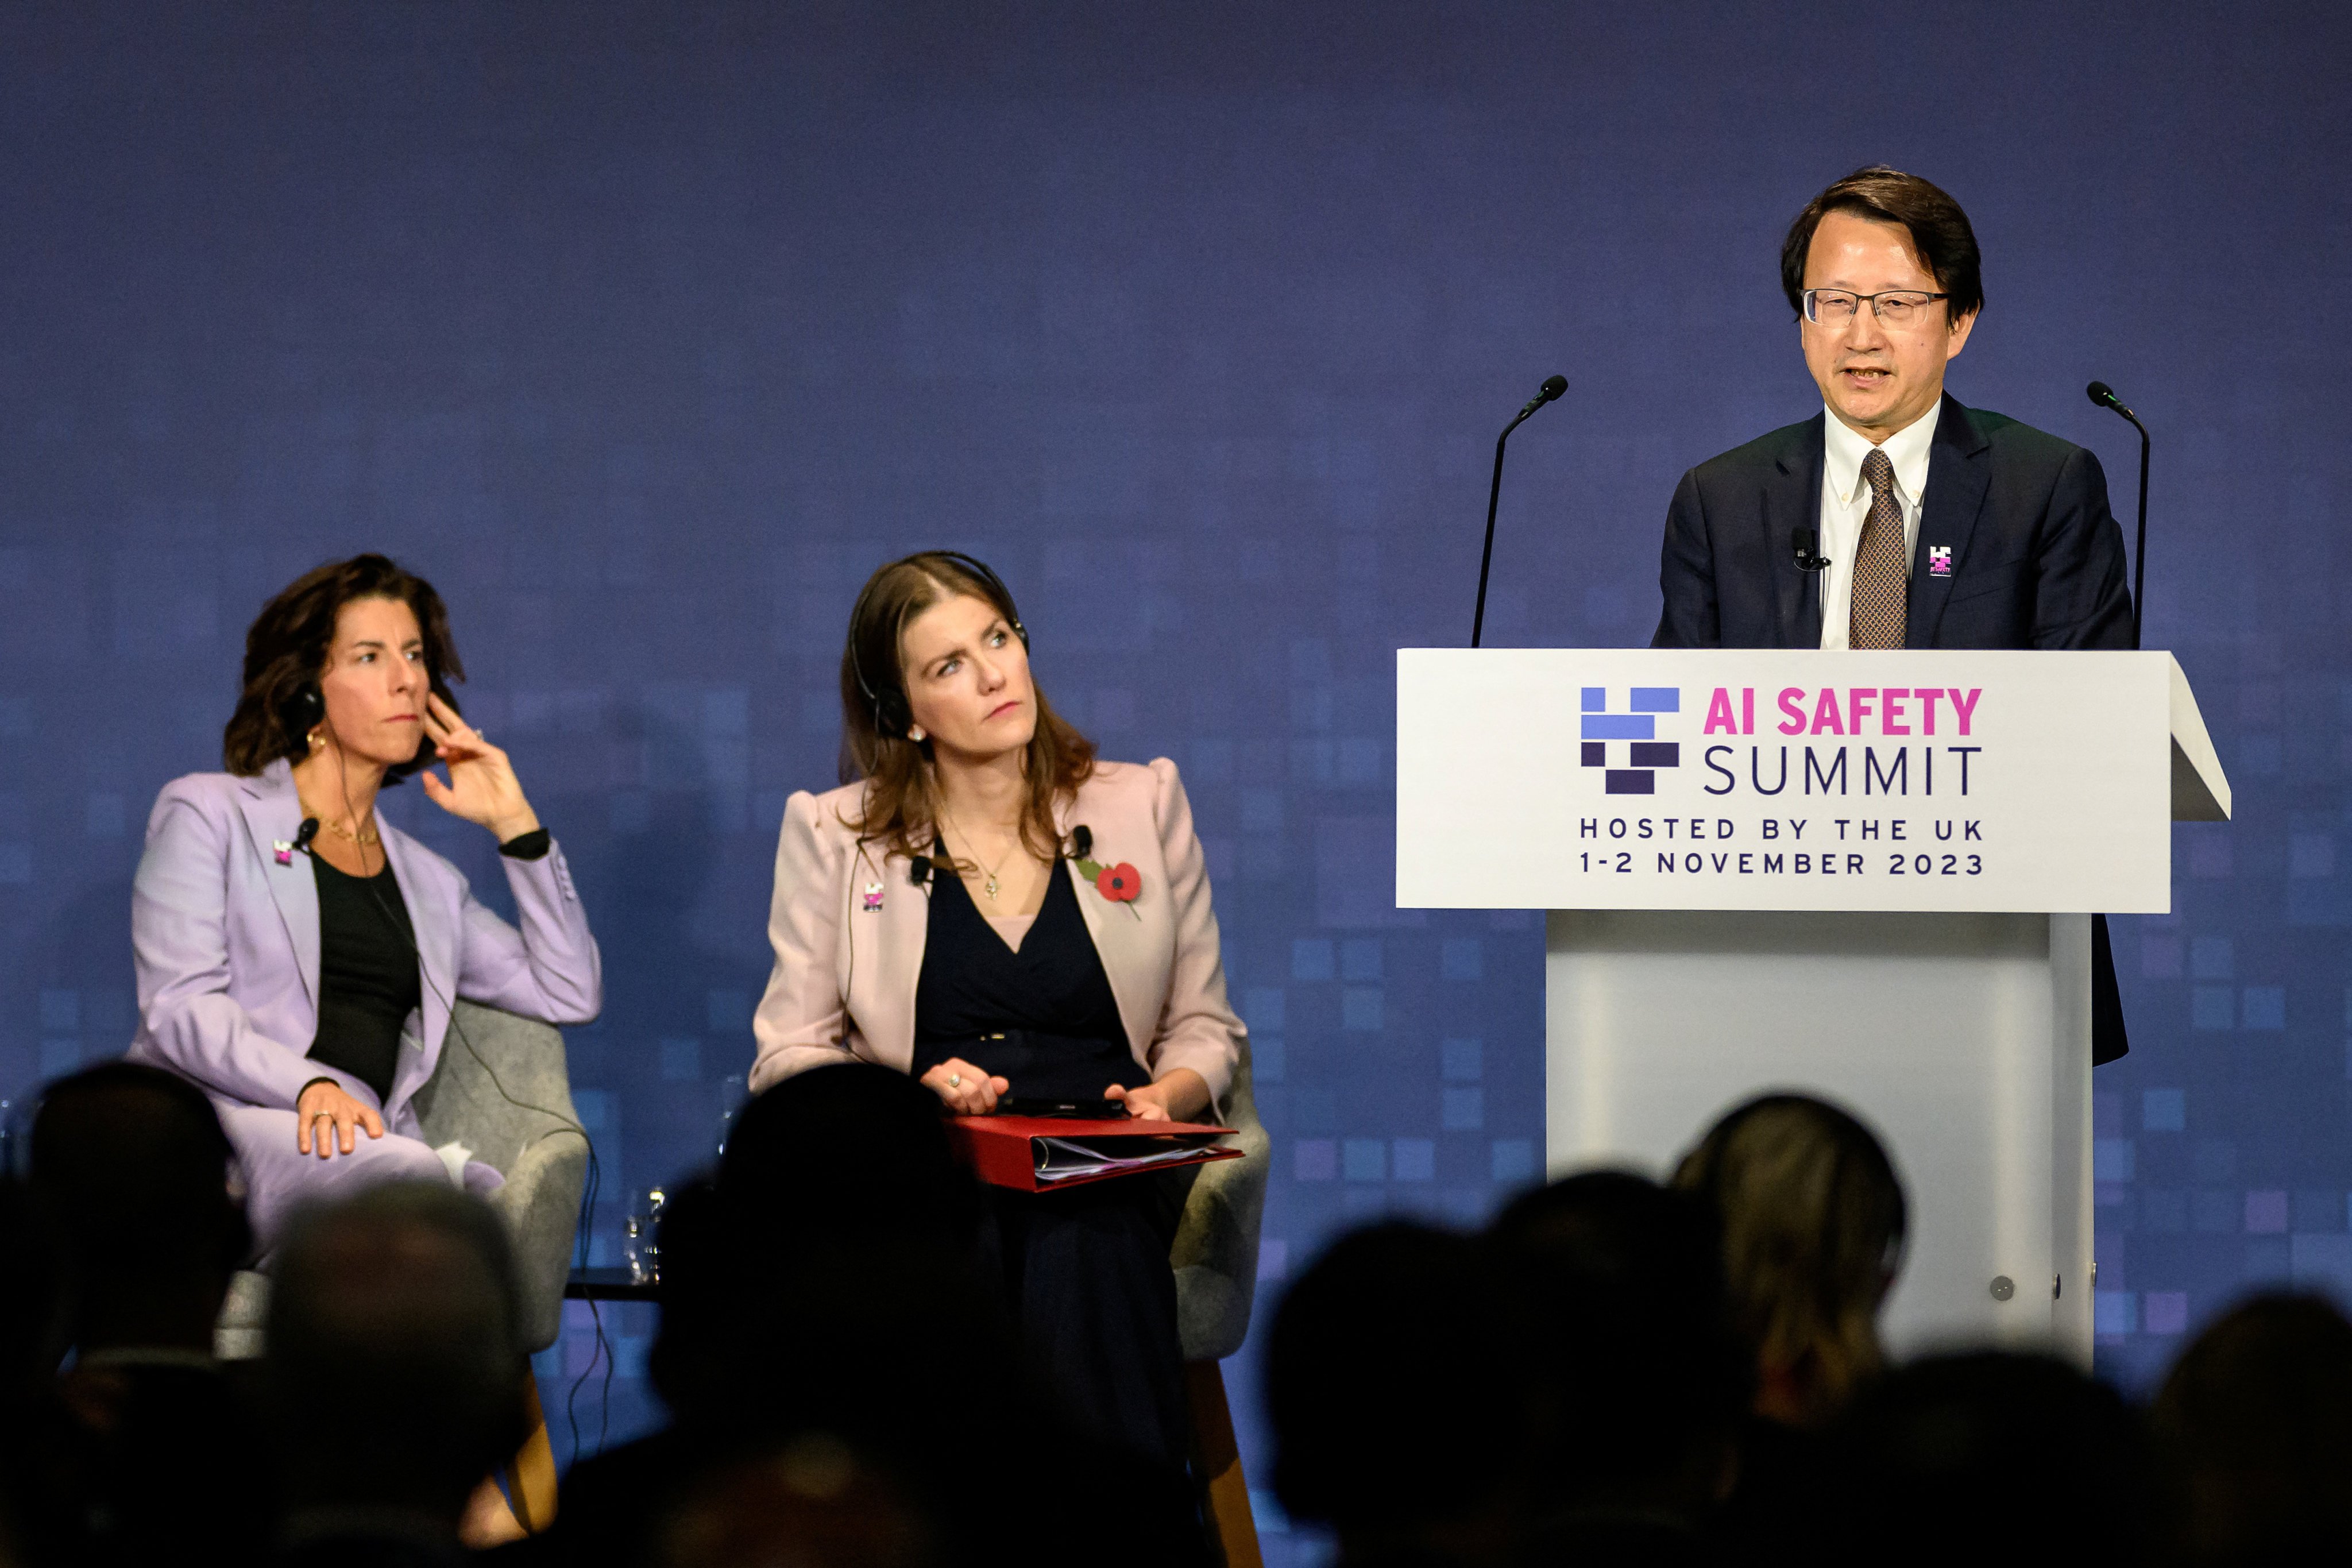 US Secretary of Commerce Gina Raimondo and British Secretary of State for Science, Innovation and Technology Michelle Donelan listen to China’s Vice-Minister of Science and Technology Wu Zhaohui speaking at the AI Safety Summit at Bletchley Park in Britain on November 1. Photo: Reuters